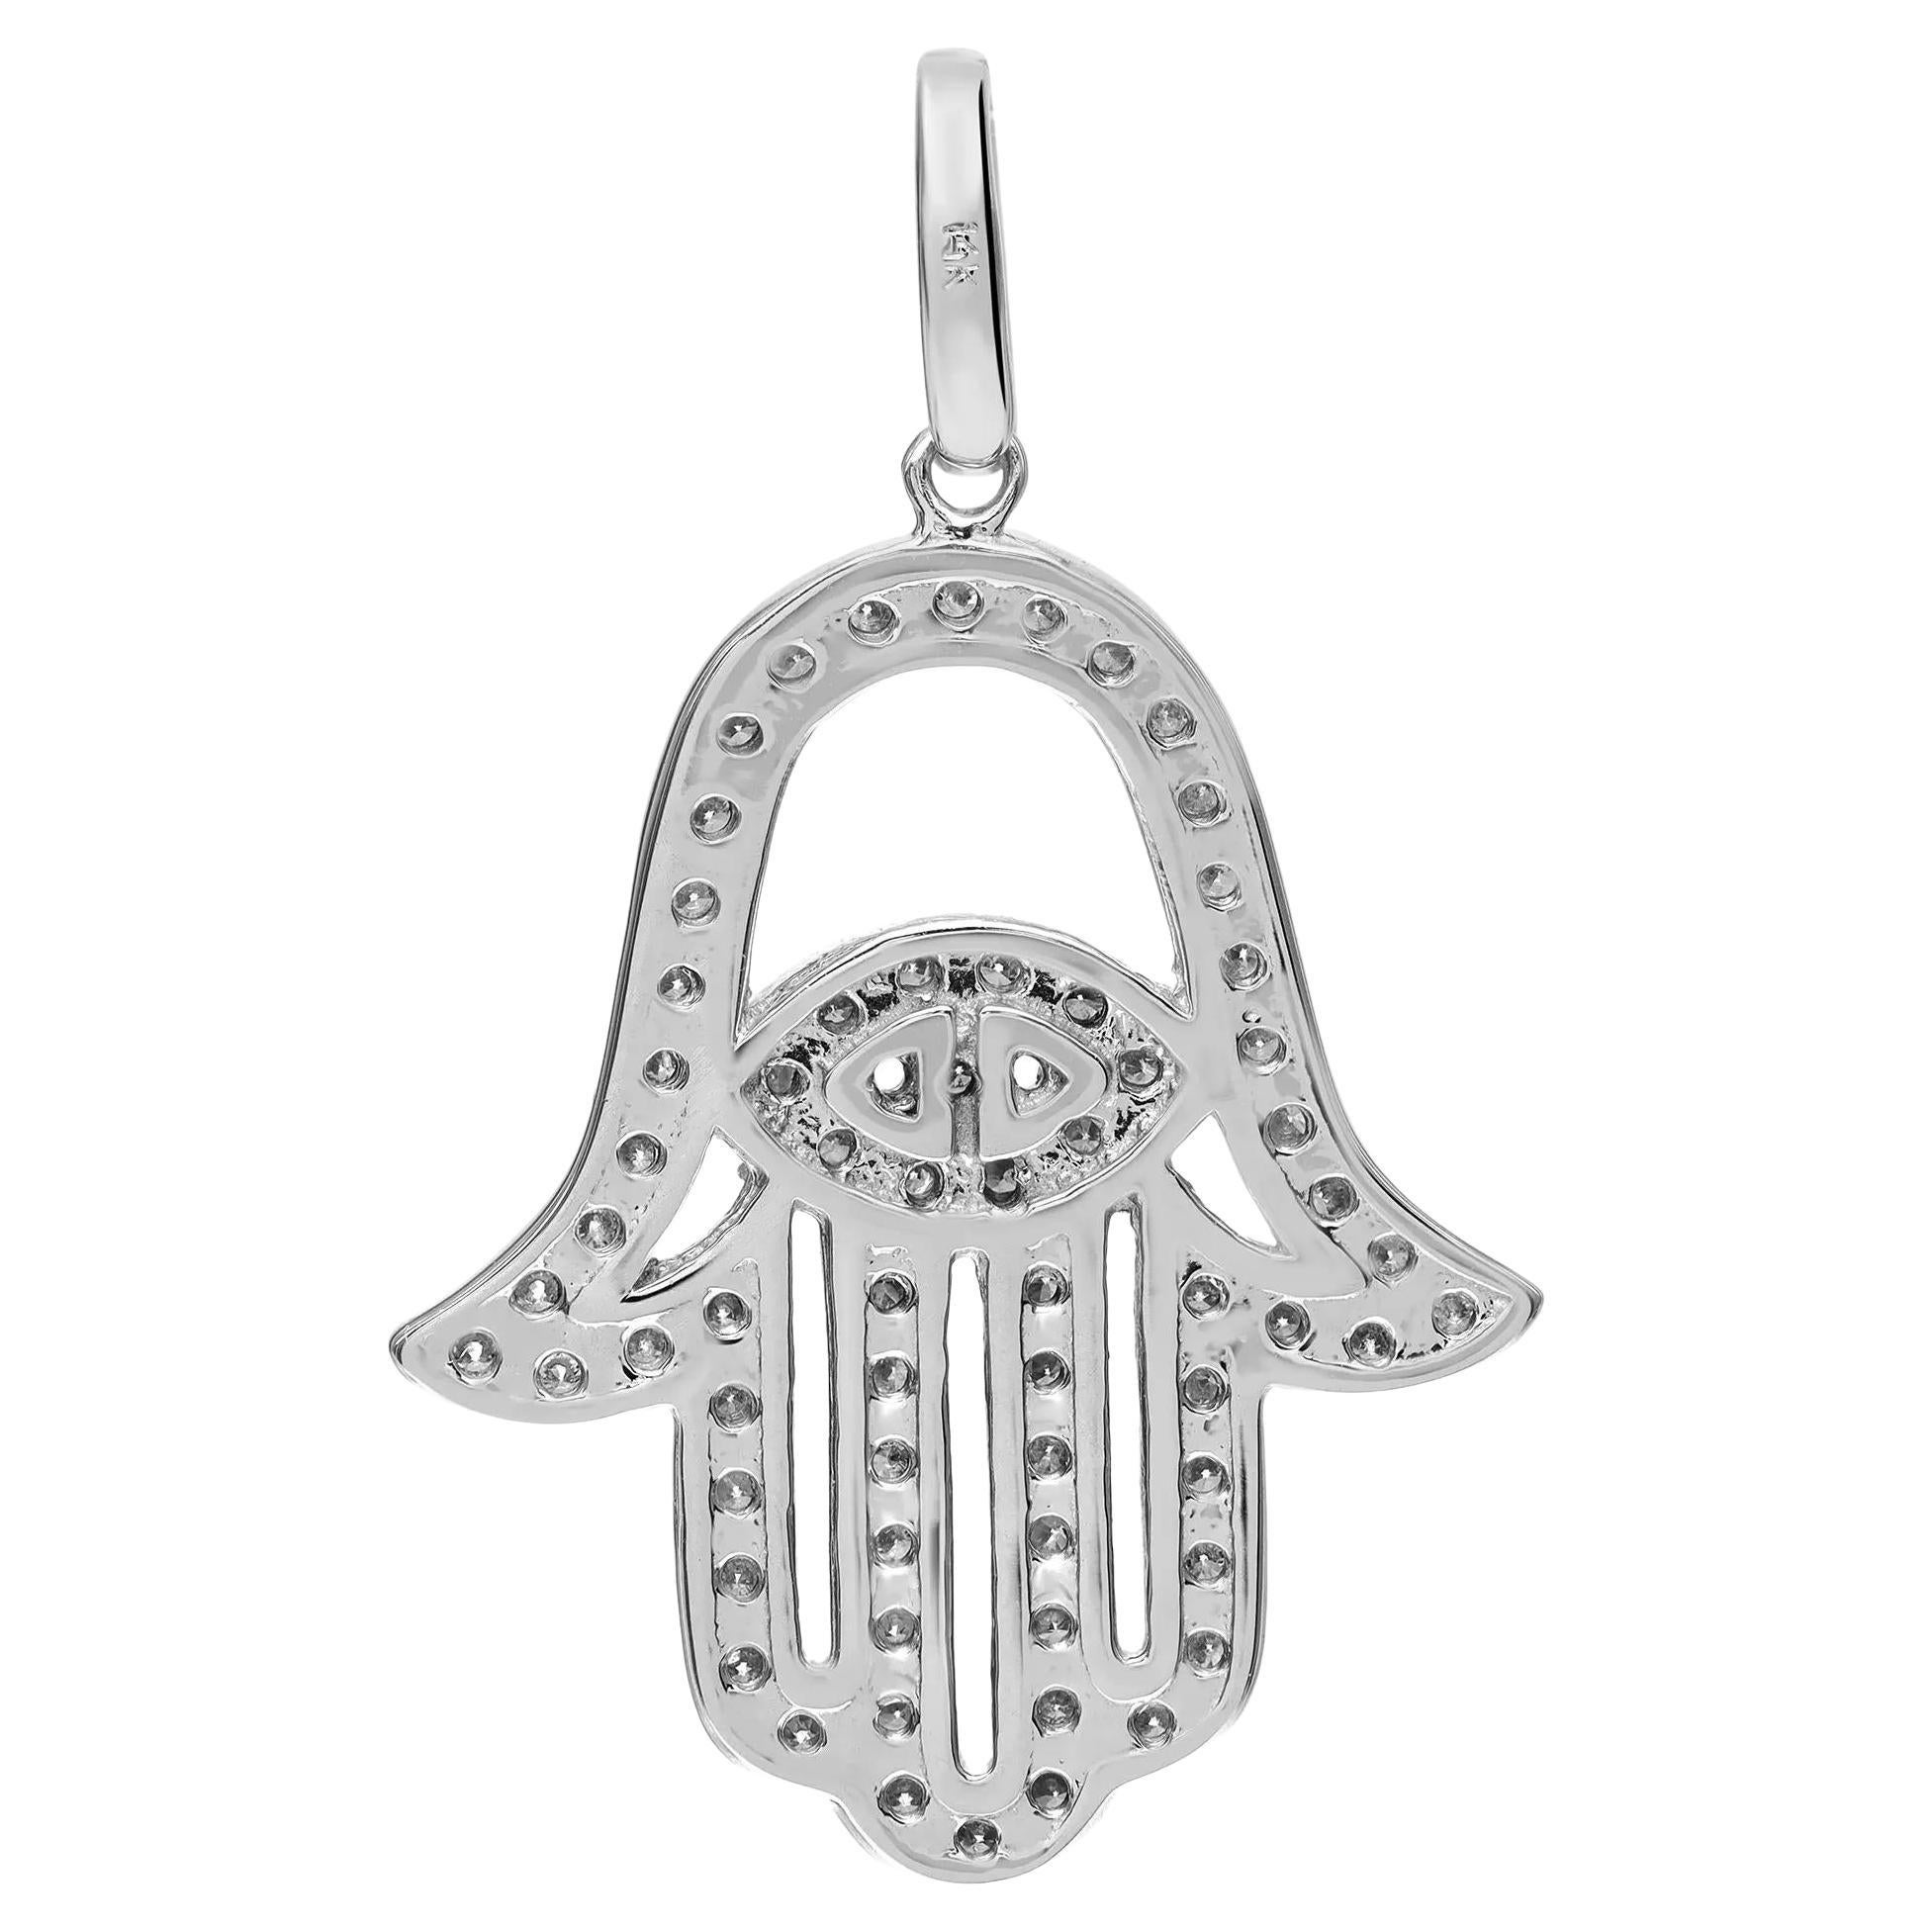 This majestic Hamsa pendant features pave set sparkling round cut diamonds. Total diamond weight: 0.62 carat. The pendant is crafted in 14K white gold. Diamond color I and SI clarity. Pendant size: 0.9 inch x 1.4 inches. Total weight: 3.58 grams.